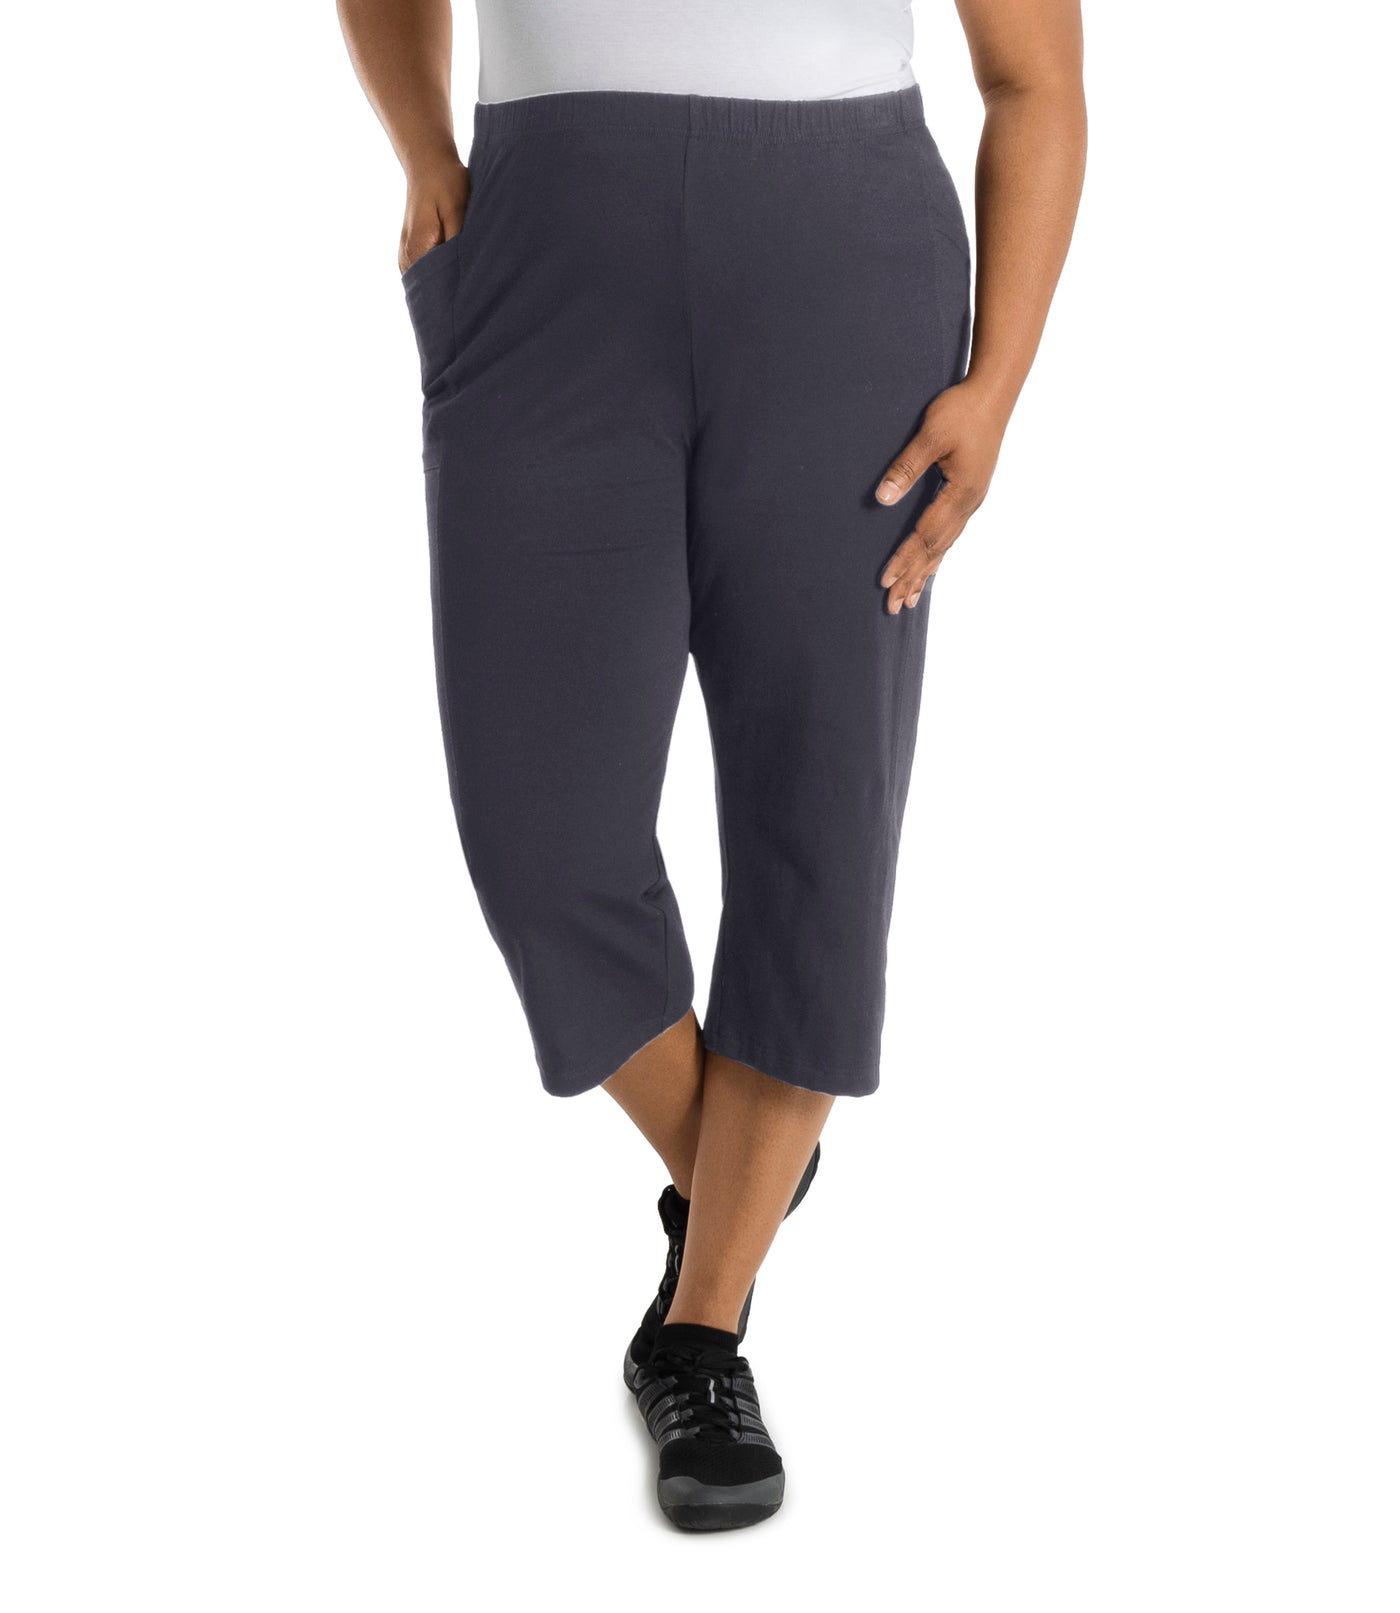 Plus size woman is facing forward, right hand in pocket, left arm and hand to side, wearing JunoActive Stretch Naturals side pocket plus size capri pant bottom. The hemline comes to mid-calf and hugs the body without being skin tight. Color is oak gray.